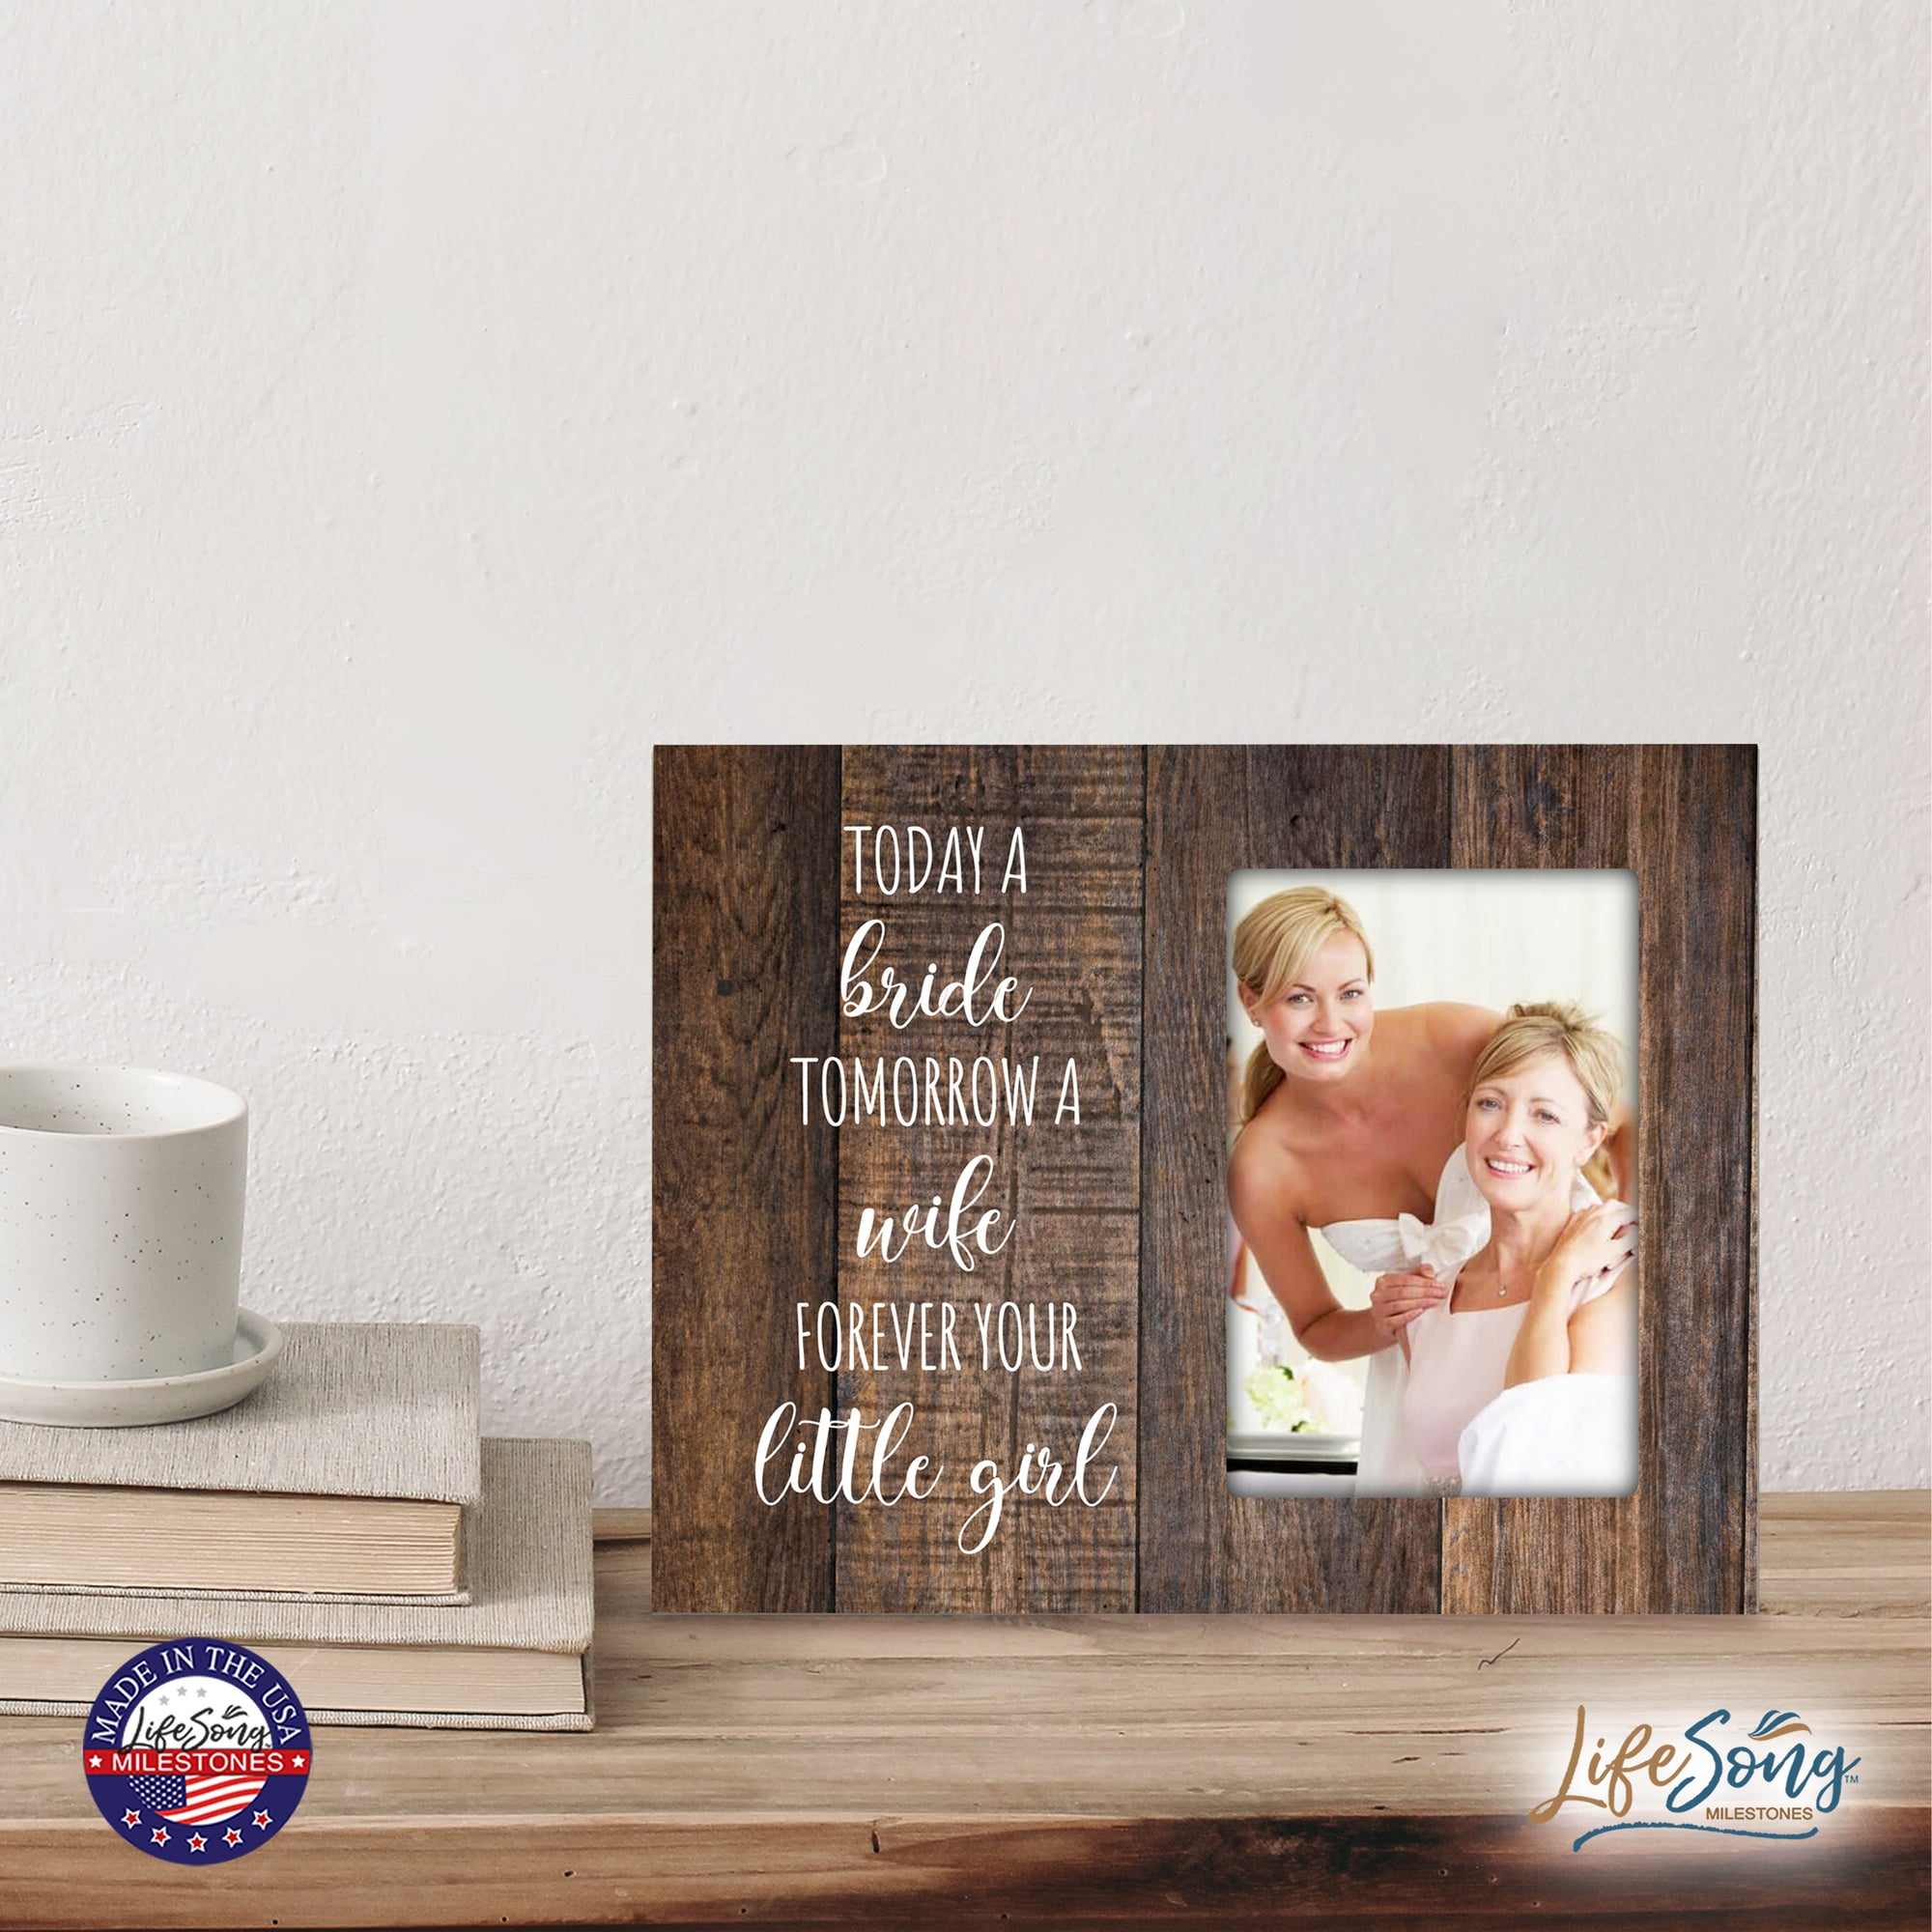 Wooden 8x10 Wedding Picture Frame Holds 4x6 Photo - Today A Bride